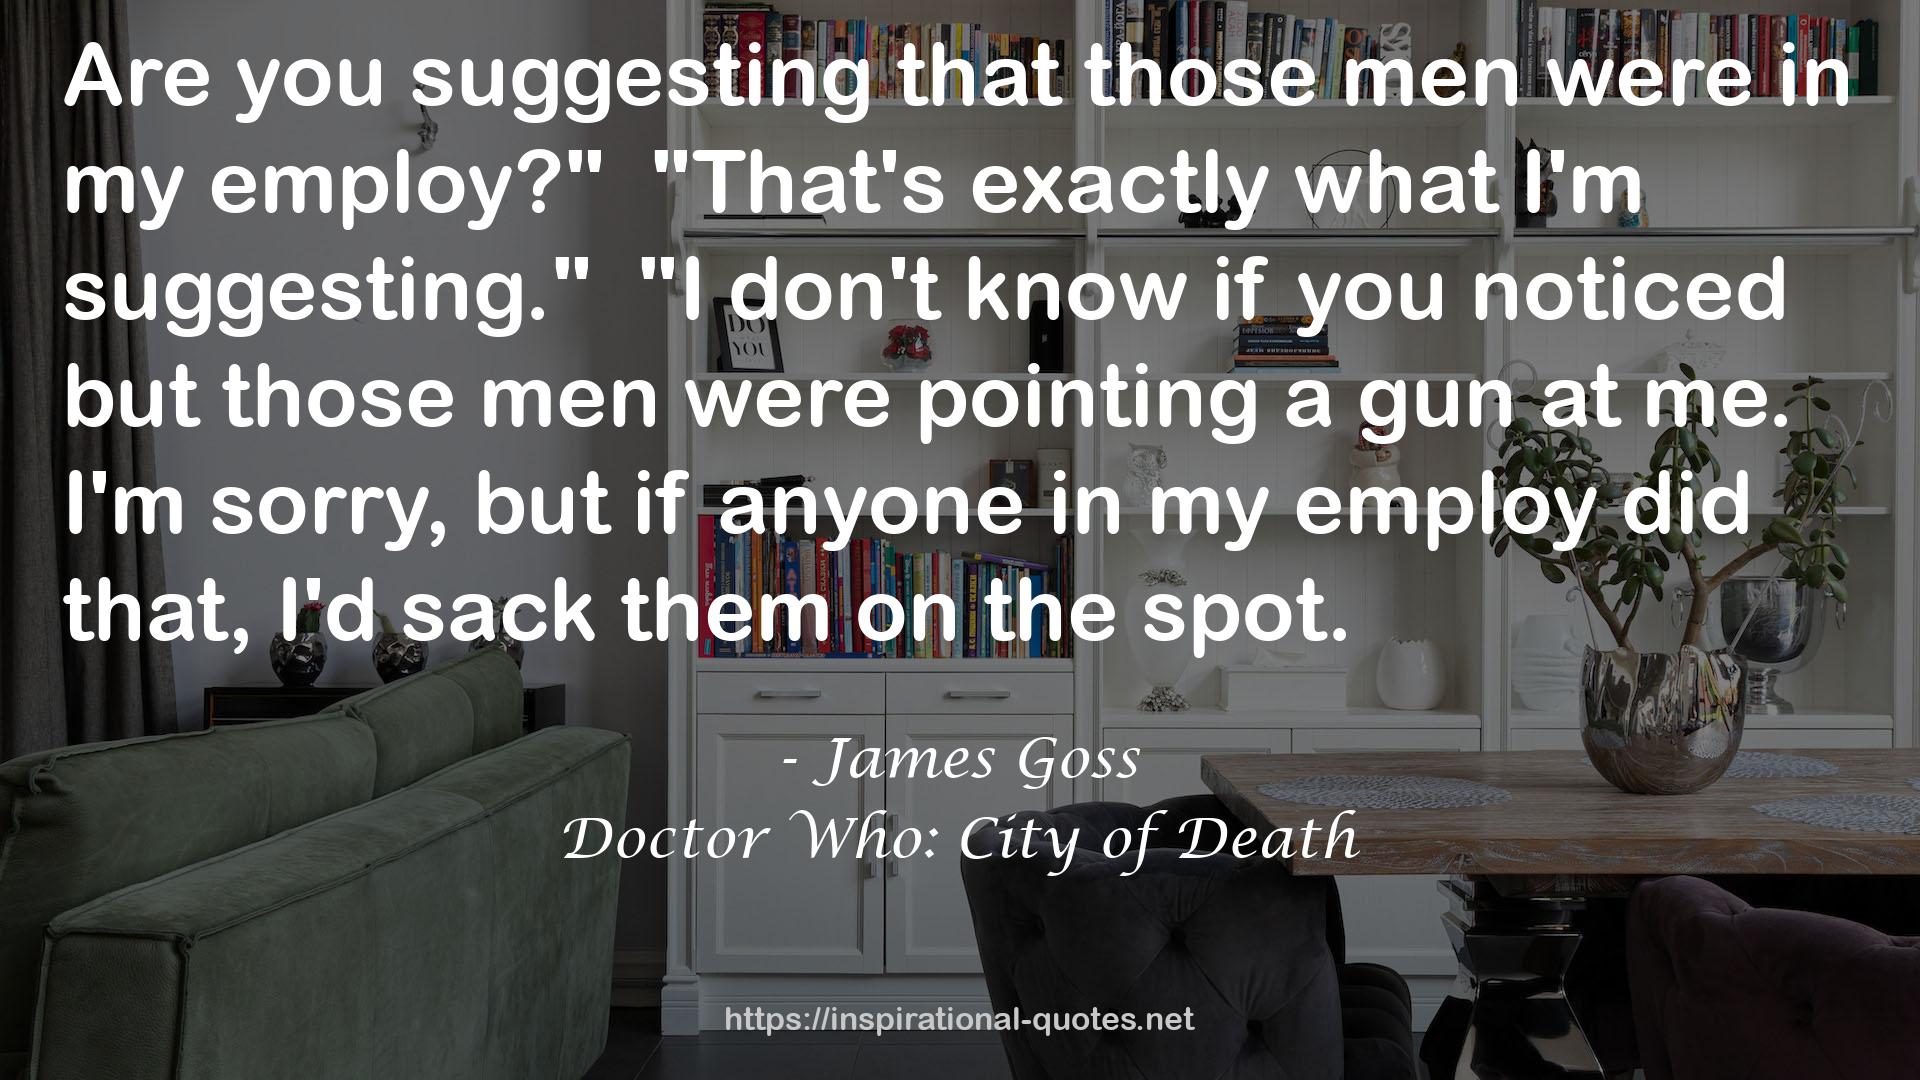 Doctor Who: City of Death QUOTES